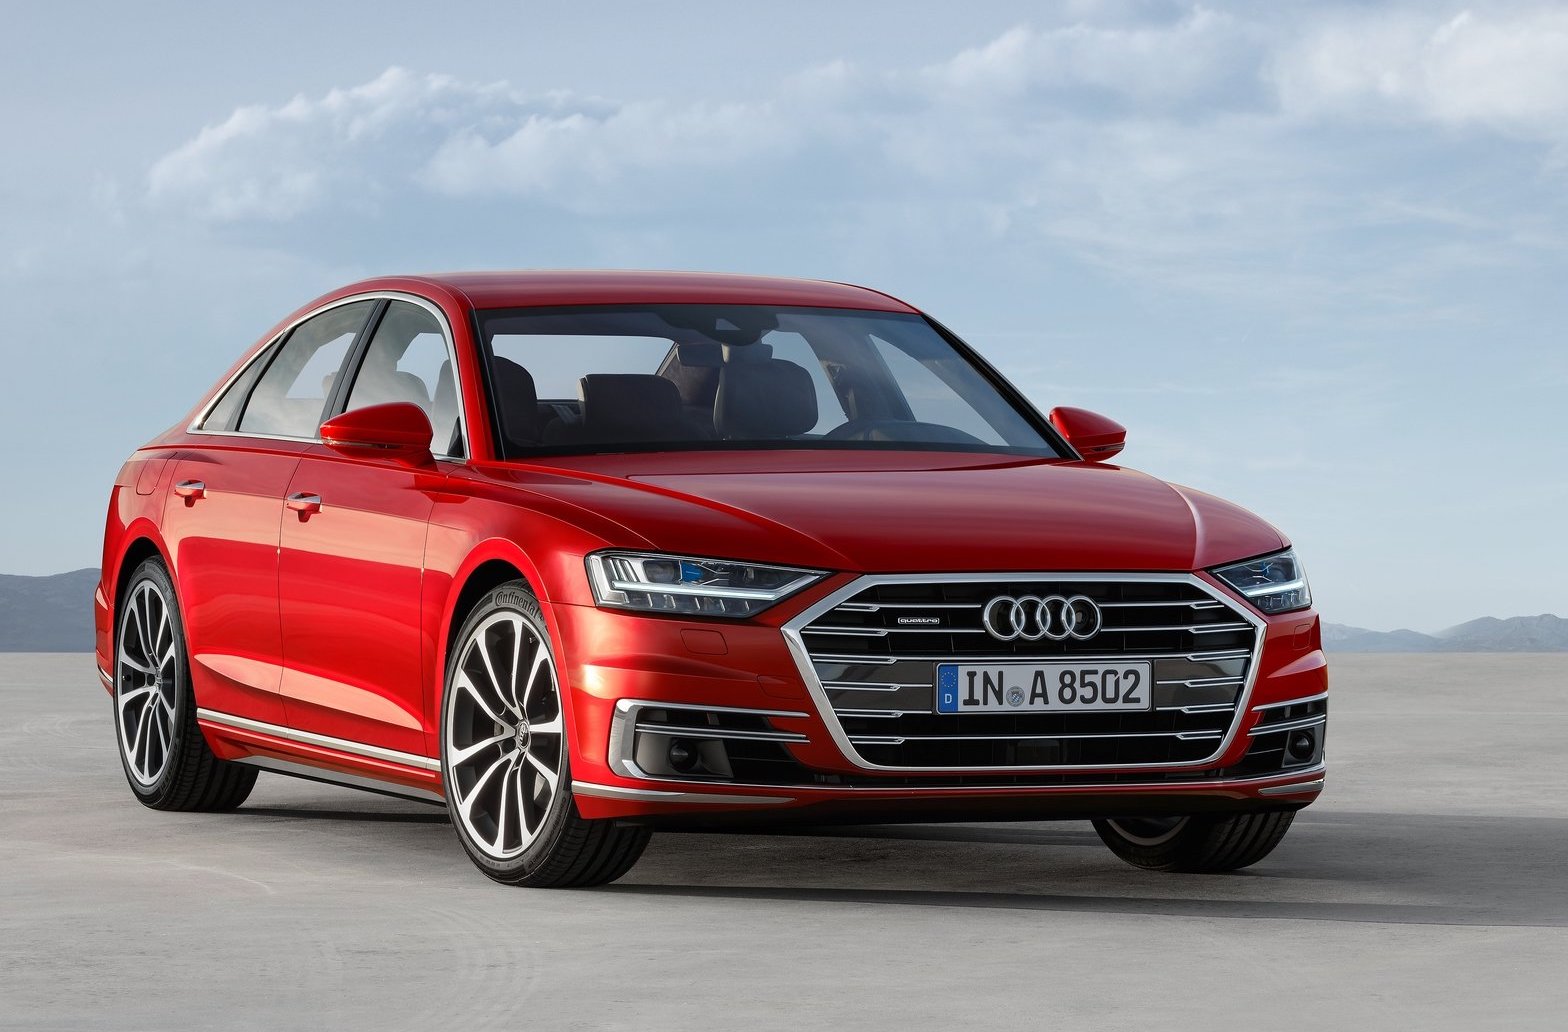 2018 Audi A8 officially revealed